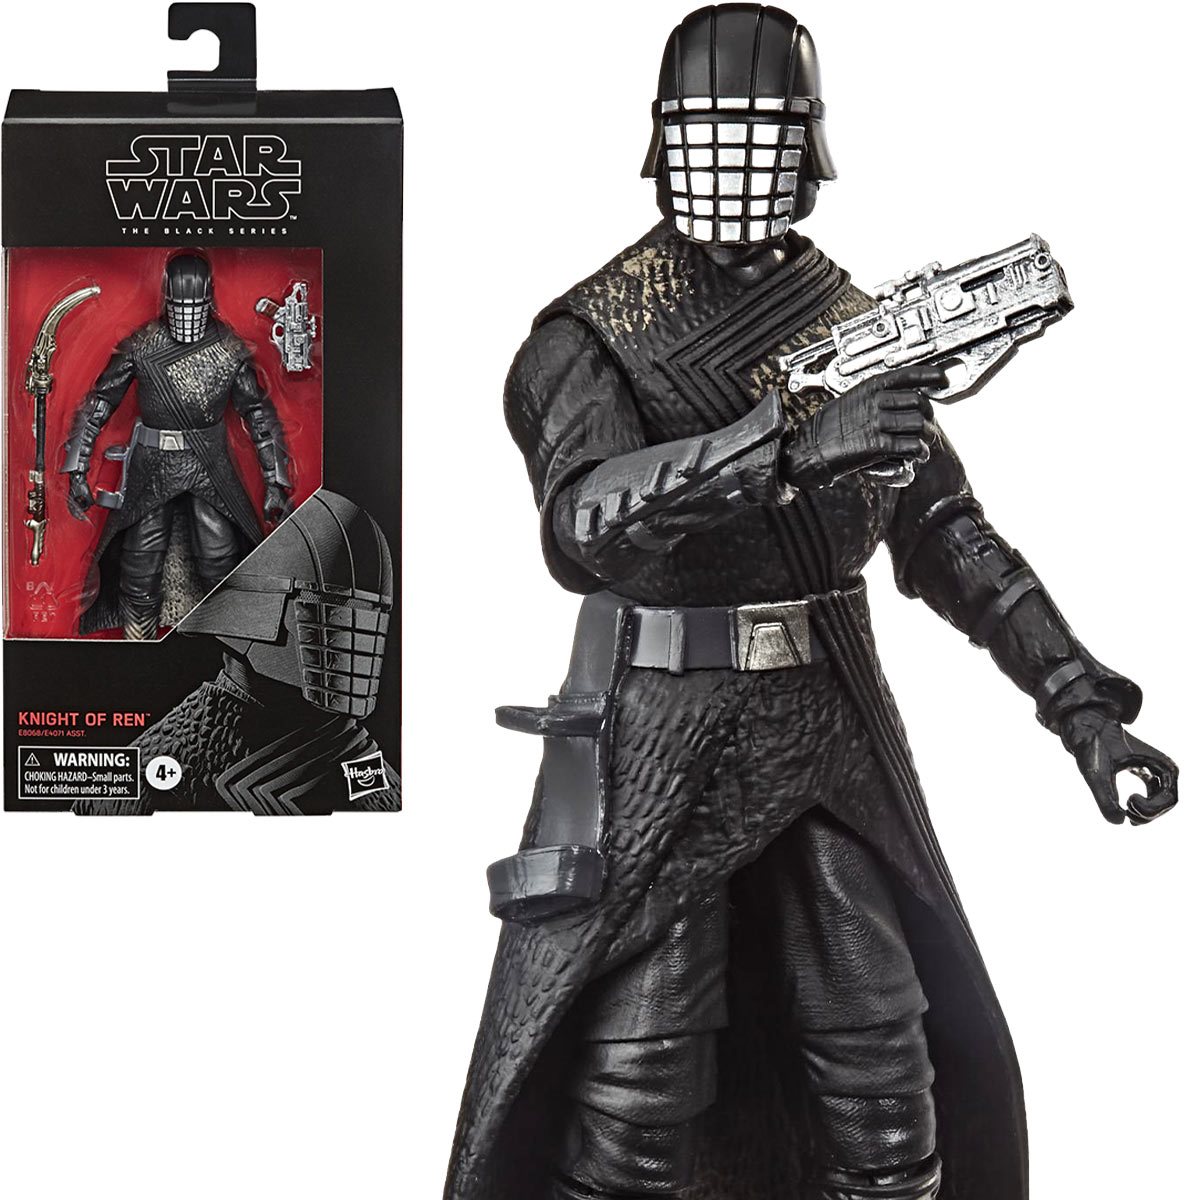 Star Wars The Black Series 6 Inch Action Figure Knight of Ren NEW 